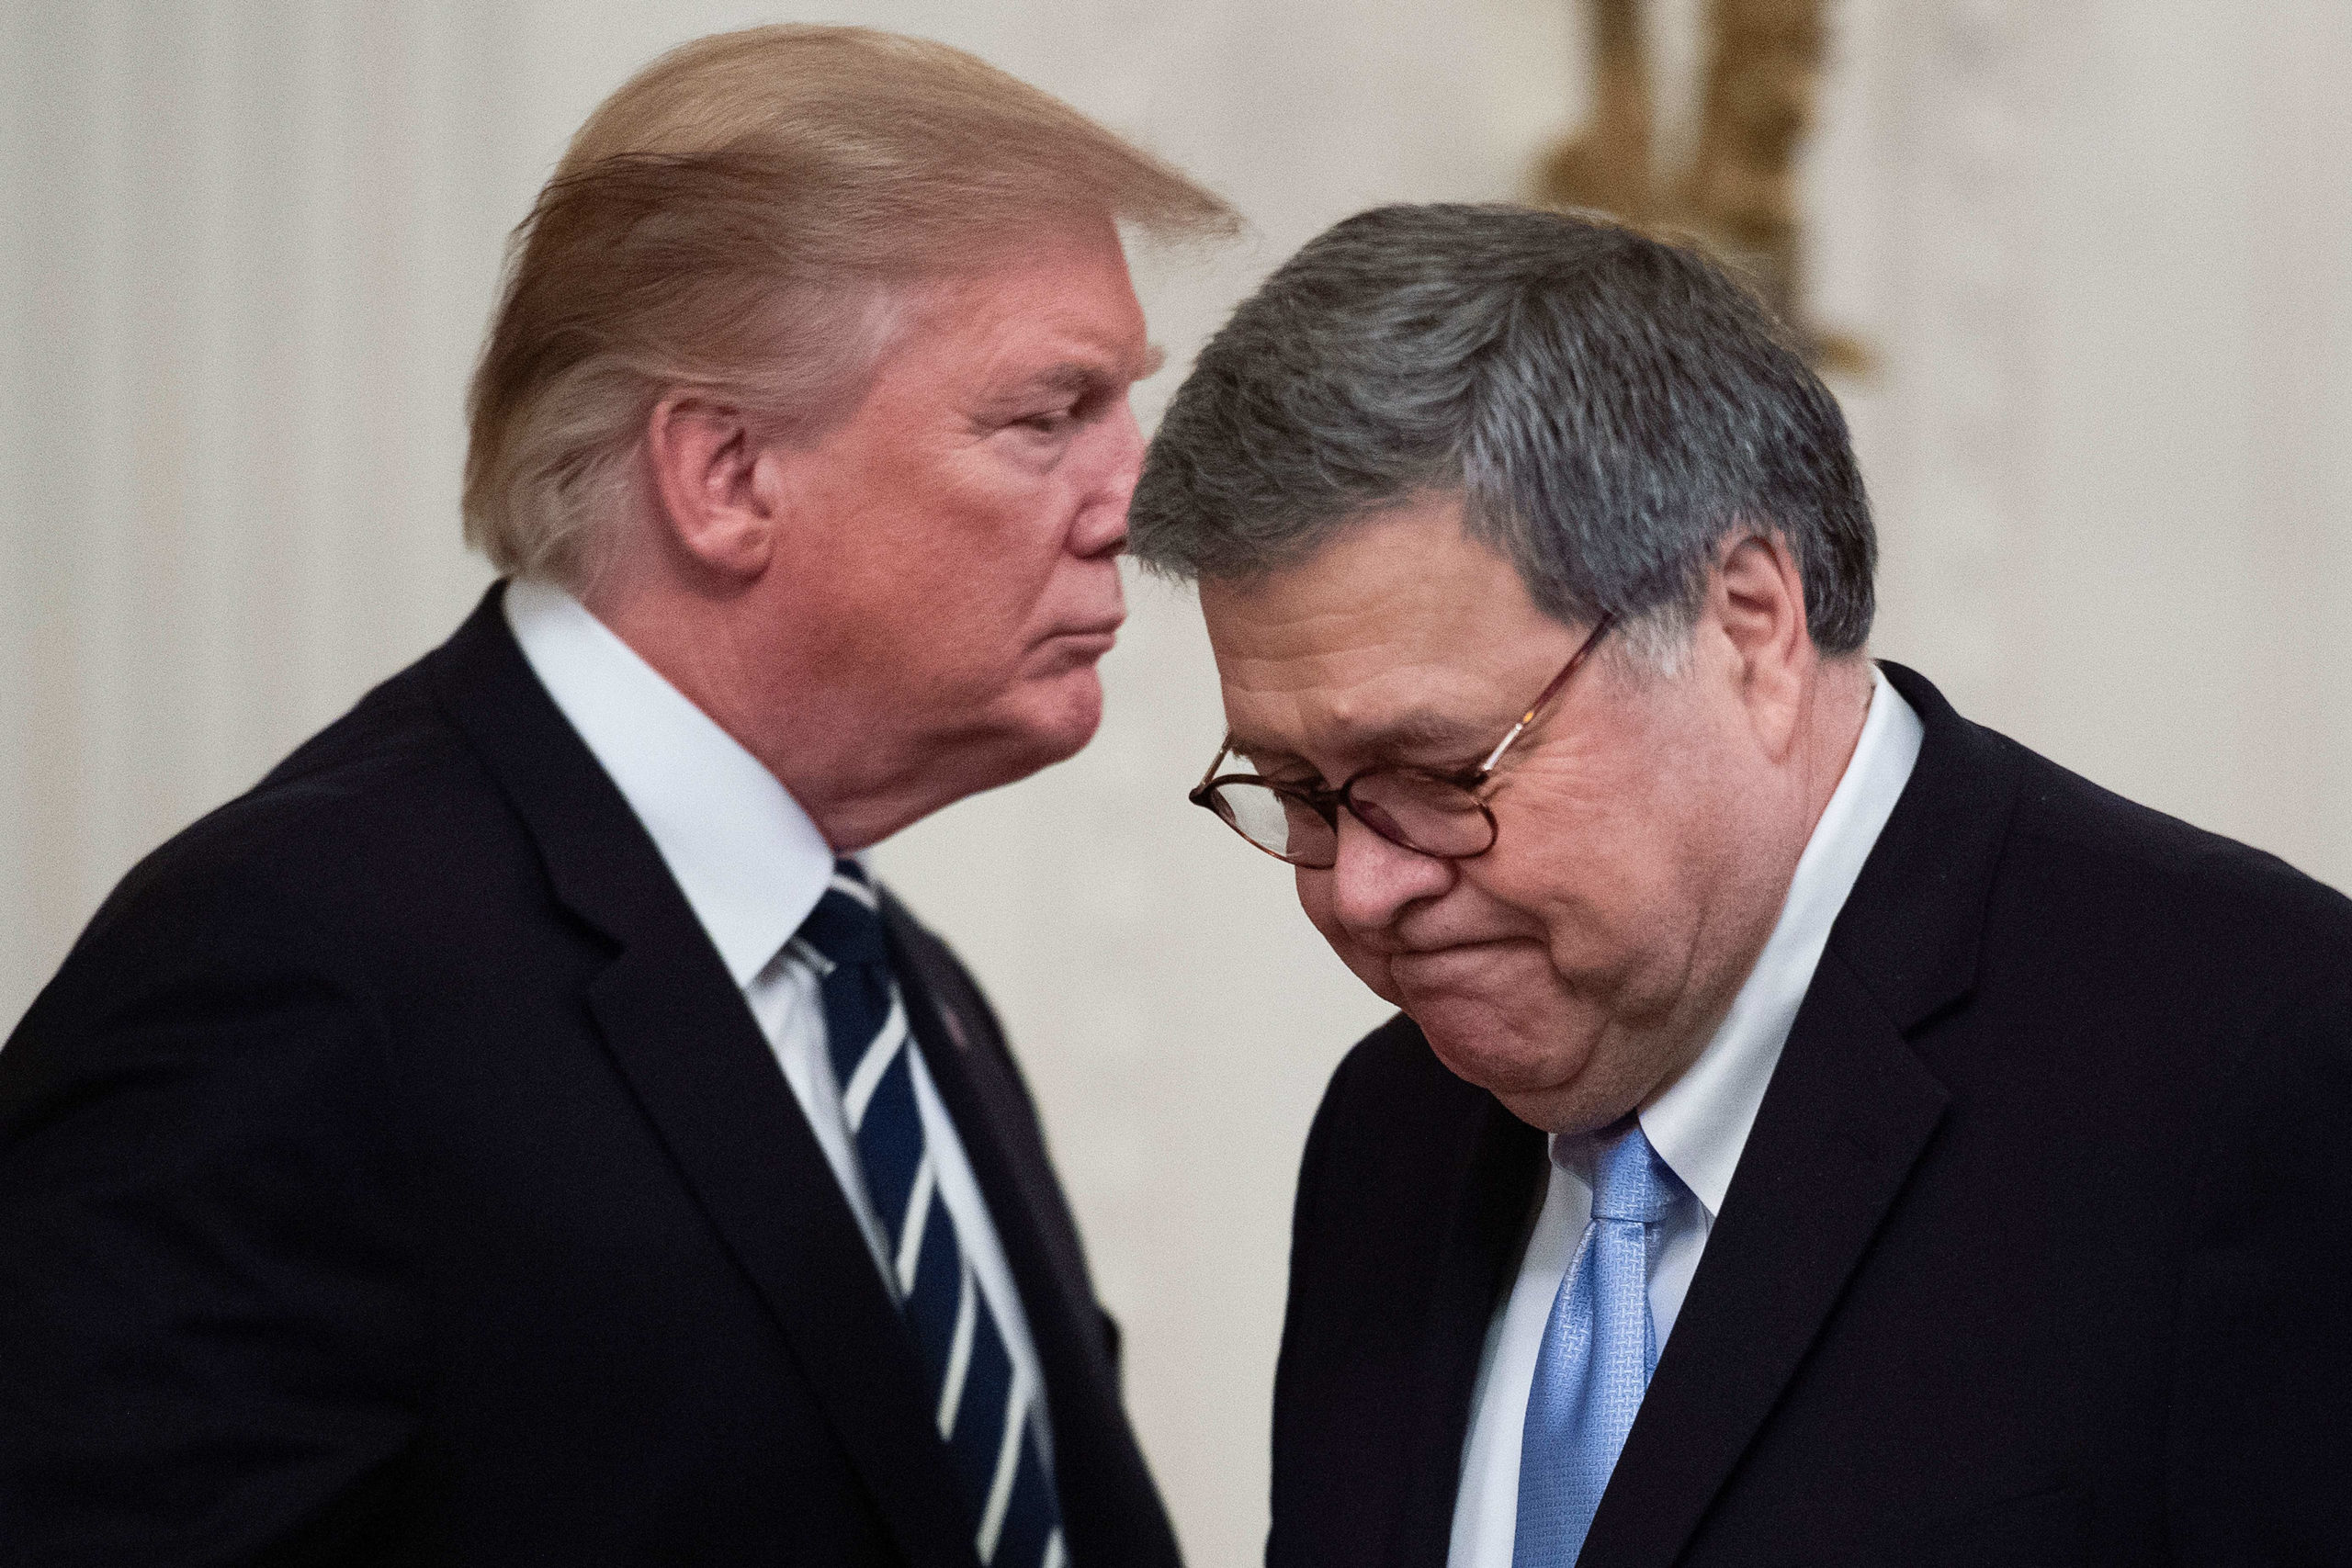 Greater than 1,000 Justice Division alumni name for Barr’s resignation